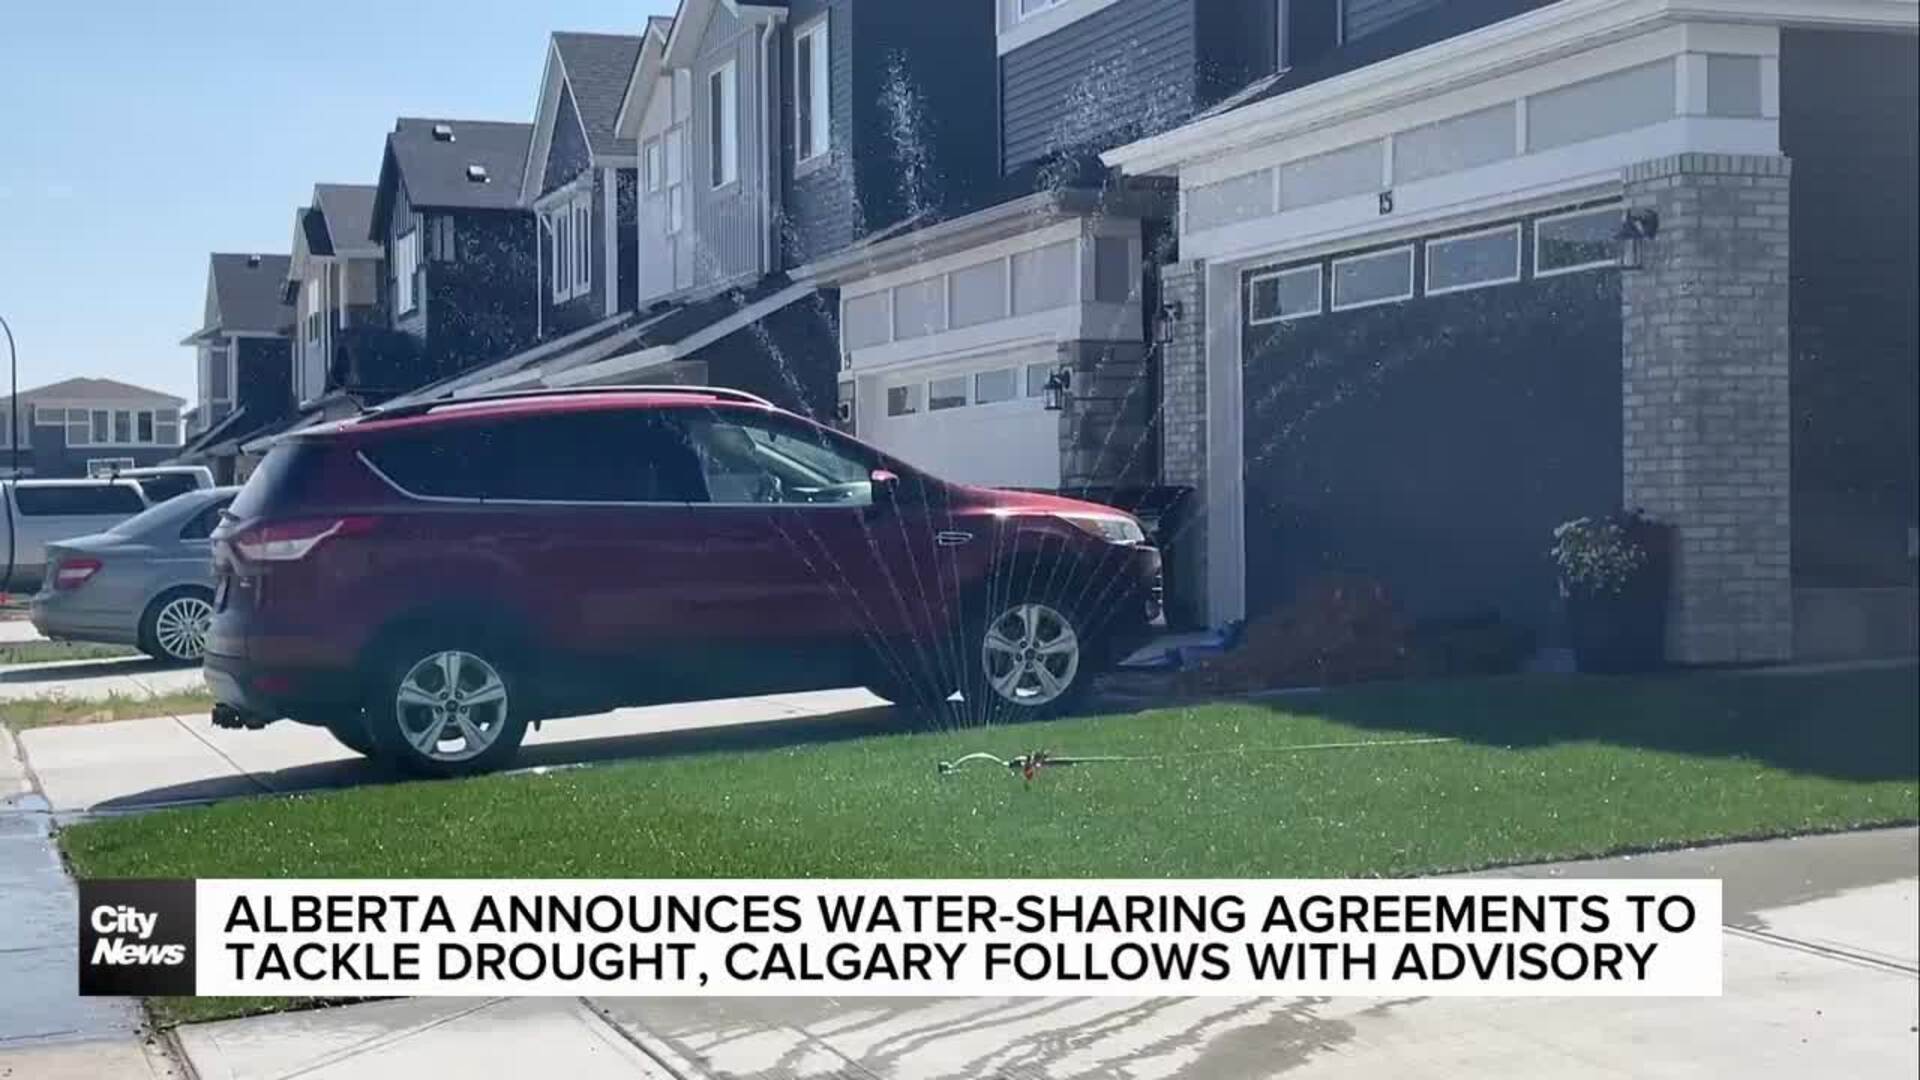 Alberta and the City of Calgary take drought measures